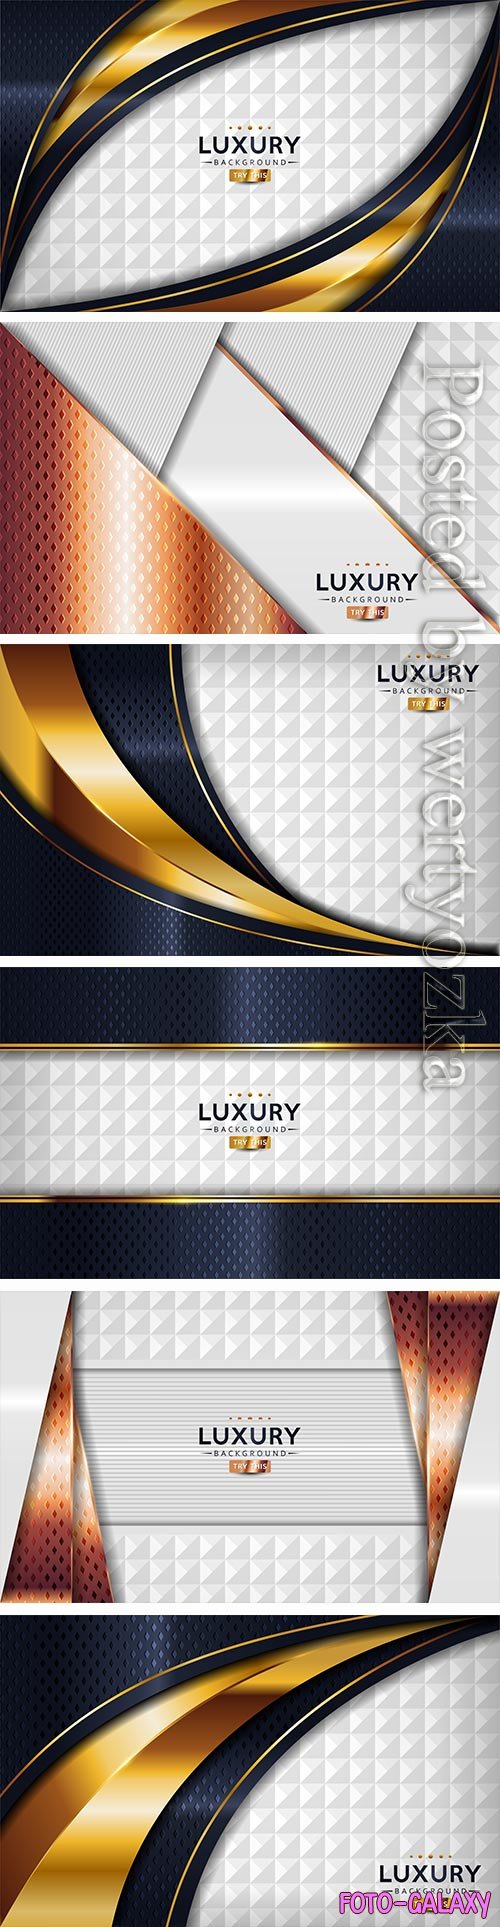 Dark navy and textured white luxury abstract vector background